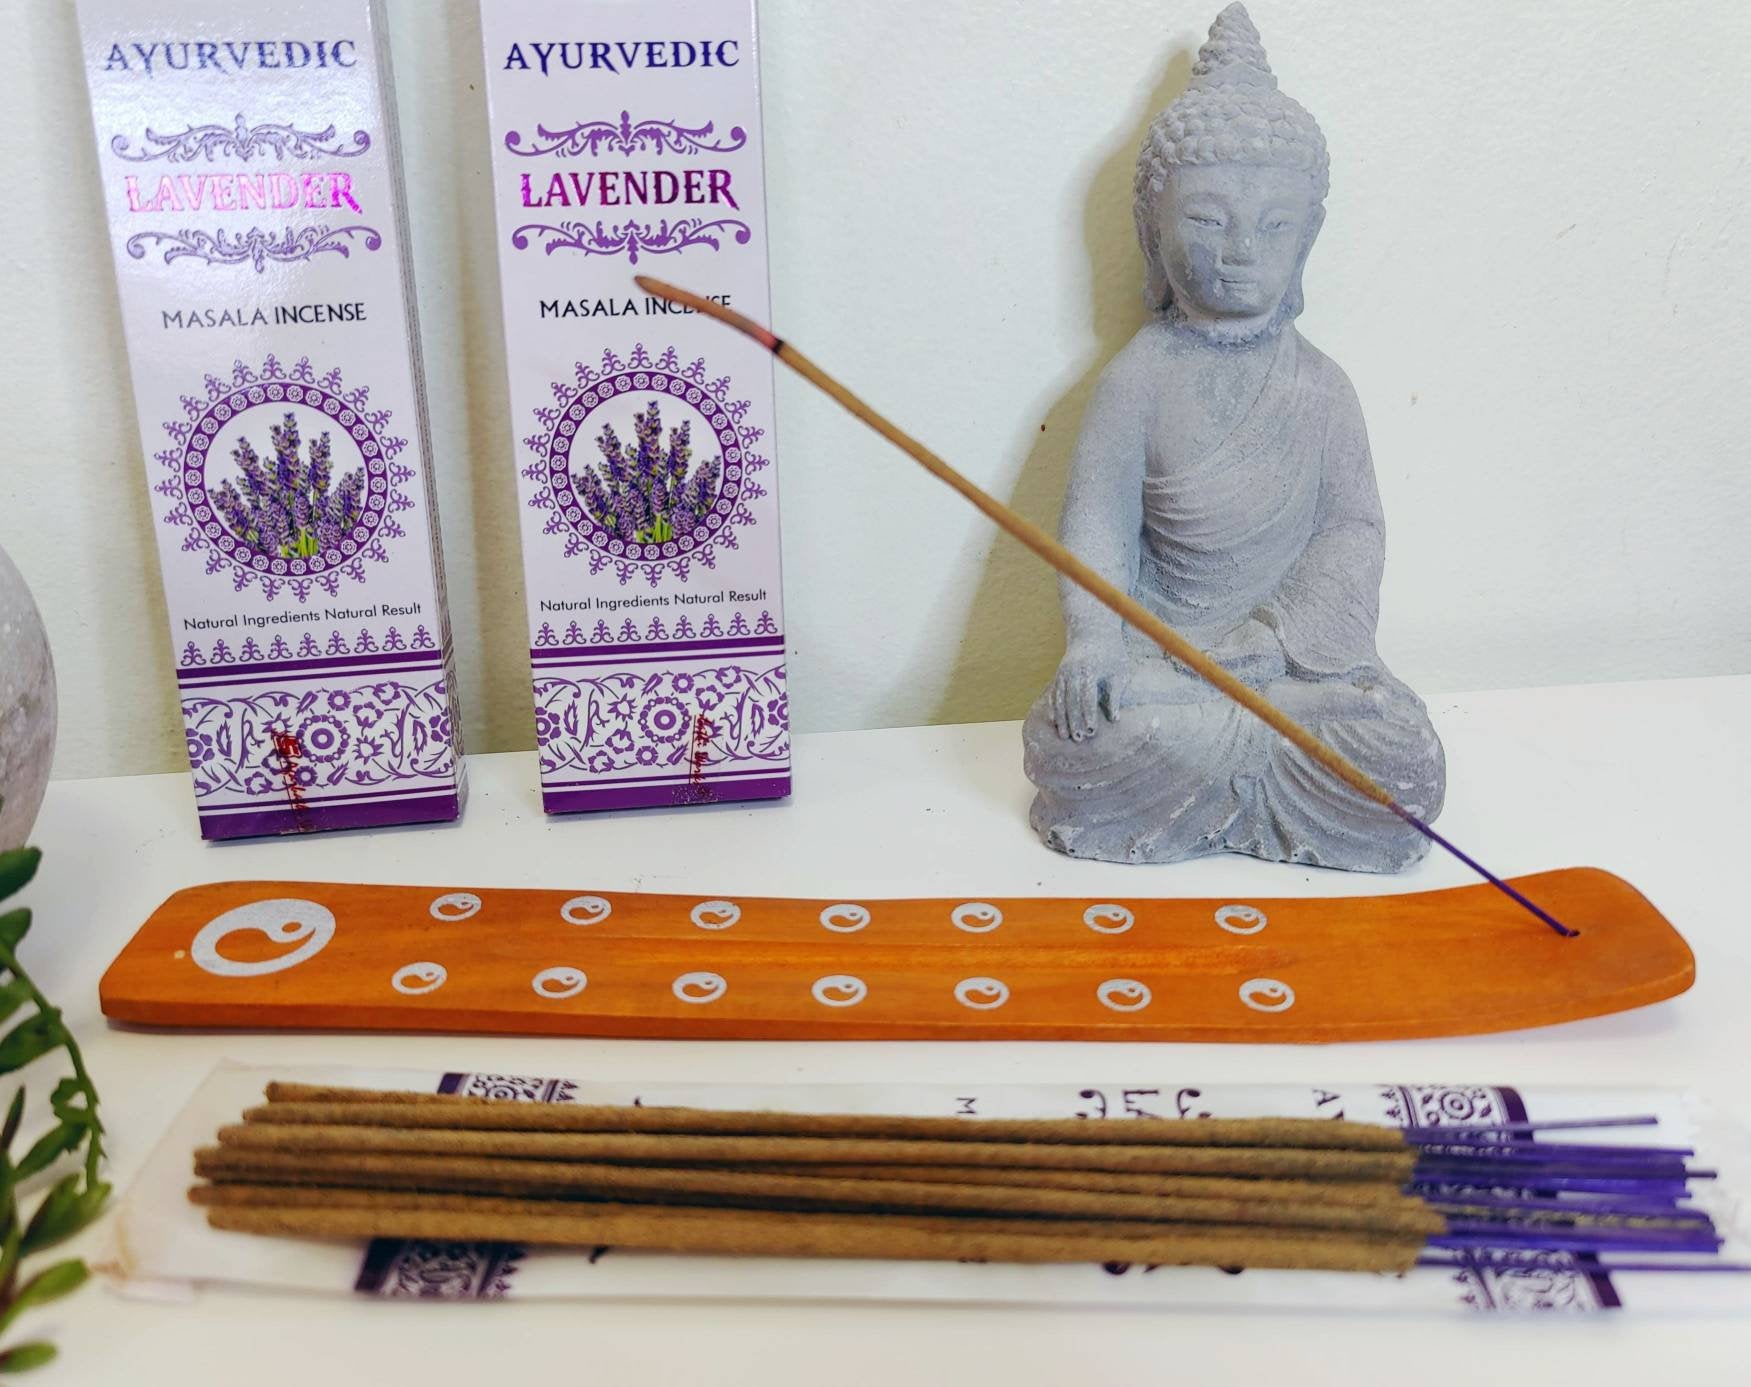 Lavender Incense Sticks. 3 Pack with Incense Stick Holder as Fragrance, for Healing & Anxiety.